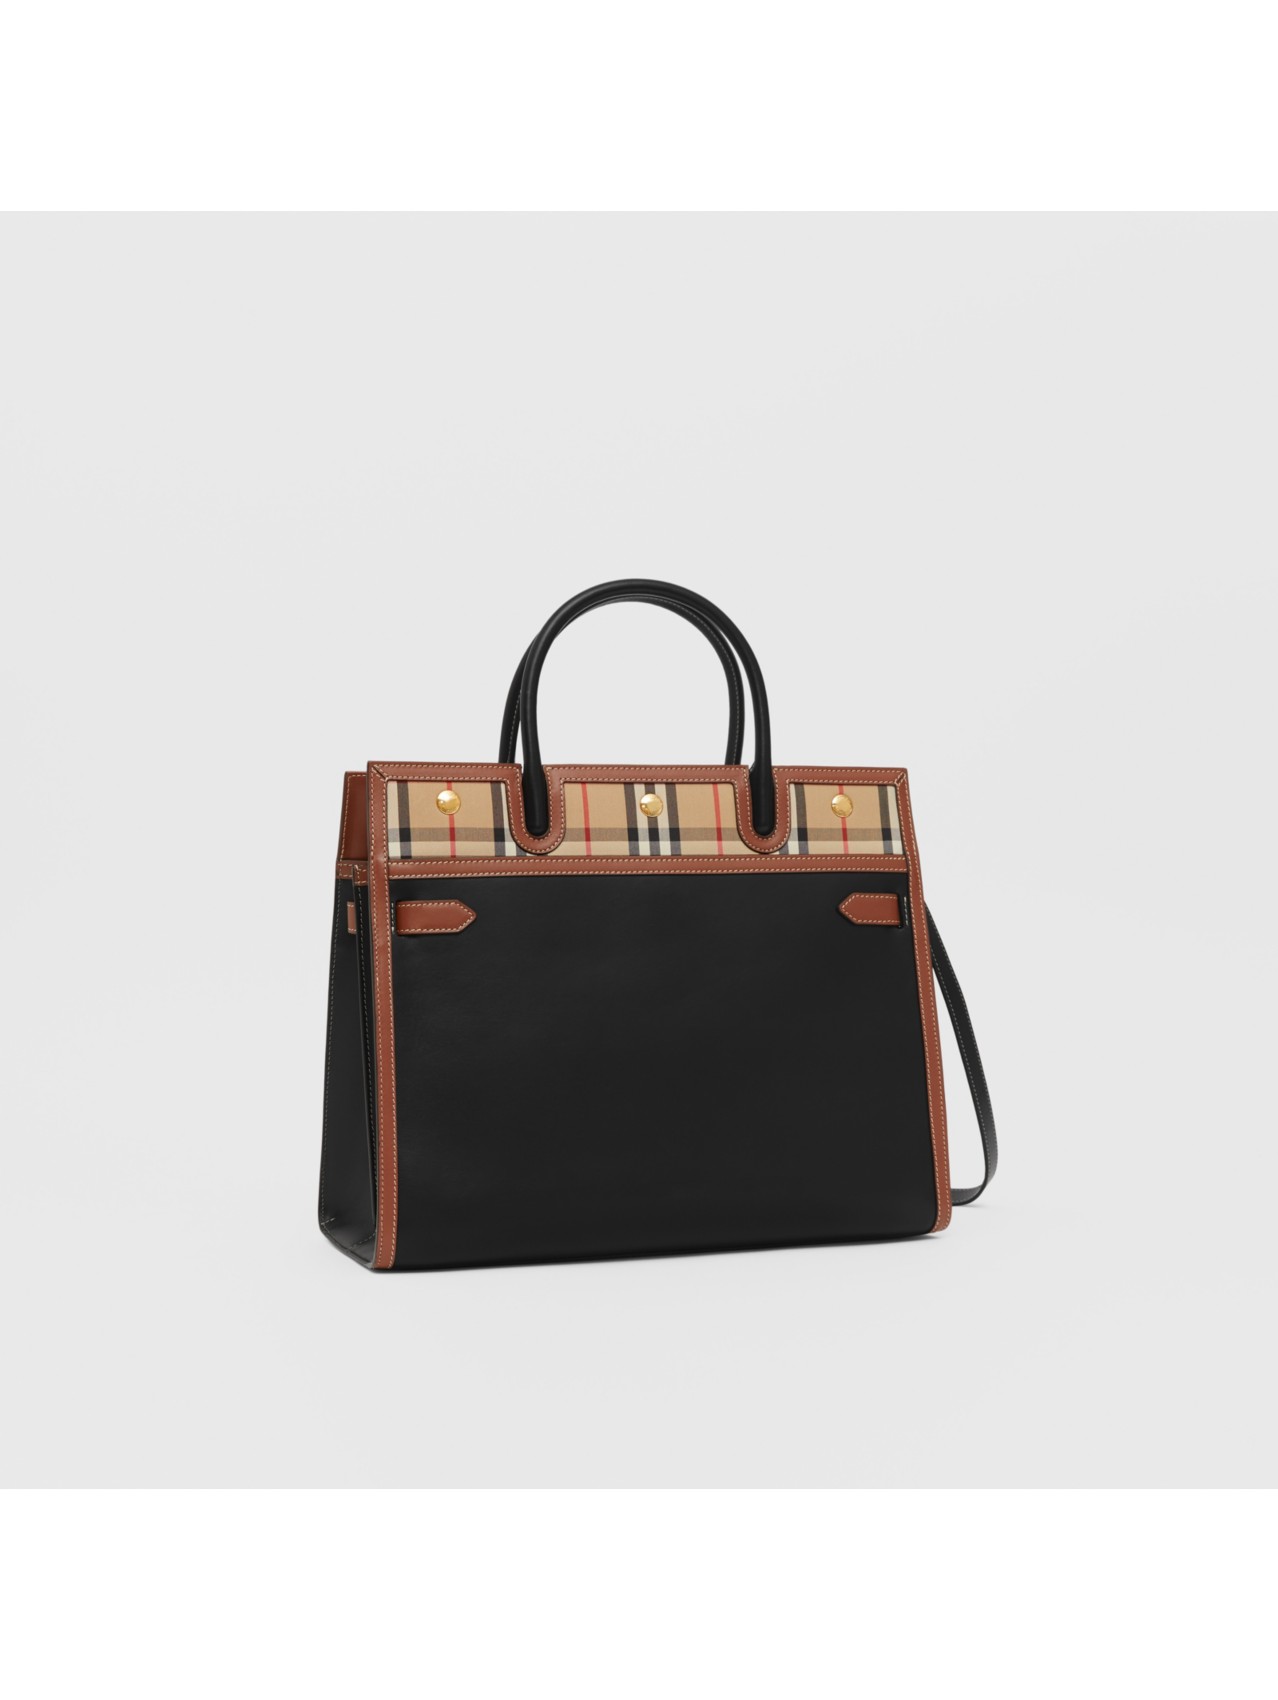 Bags | & Bags for Women | Burberry® Official